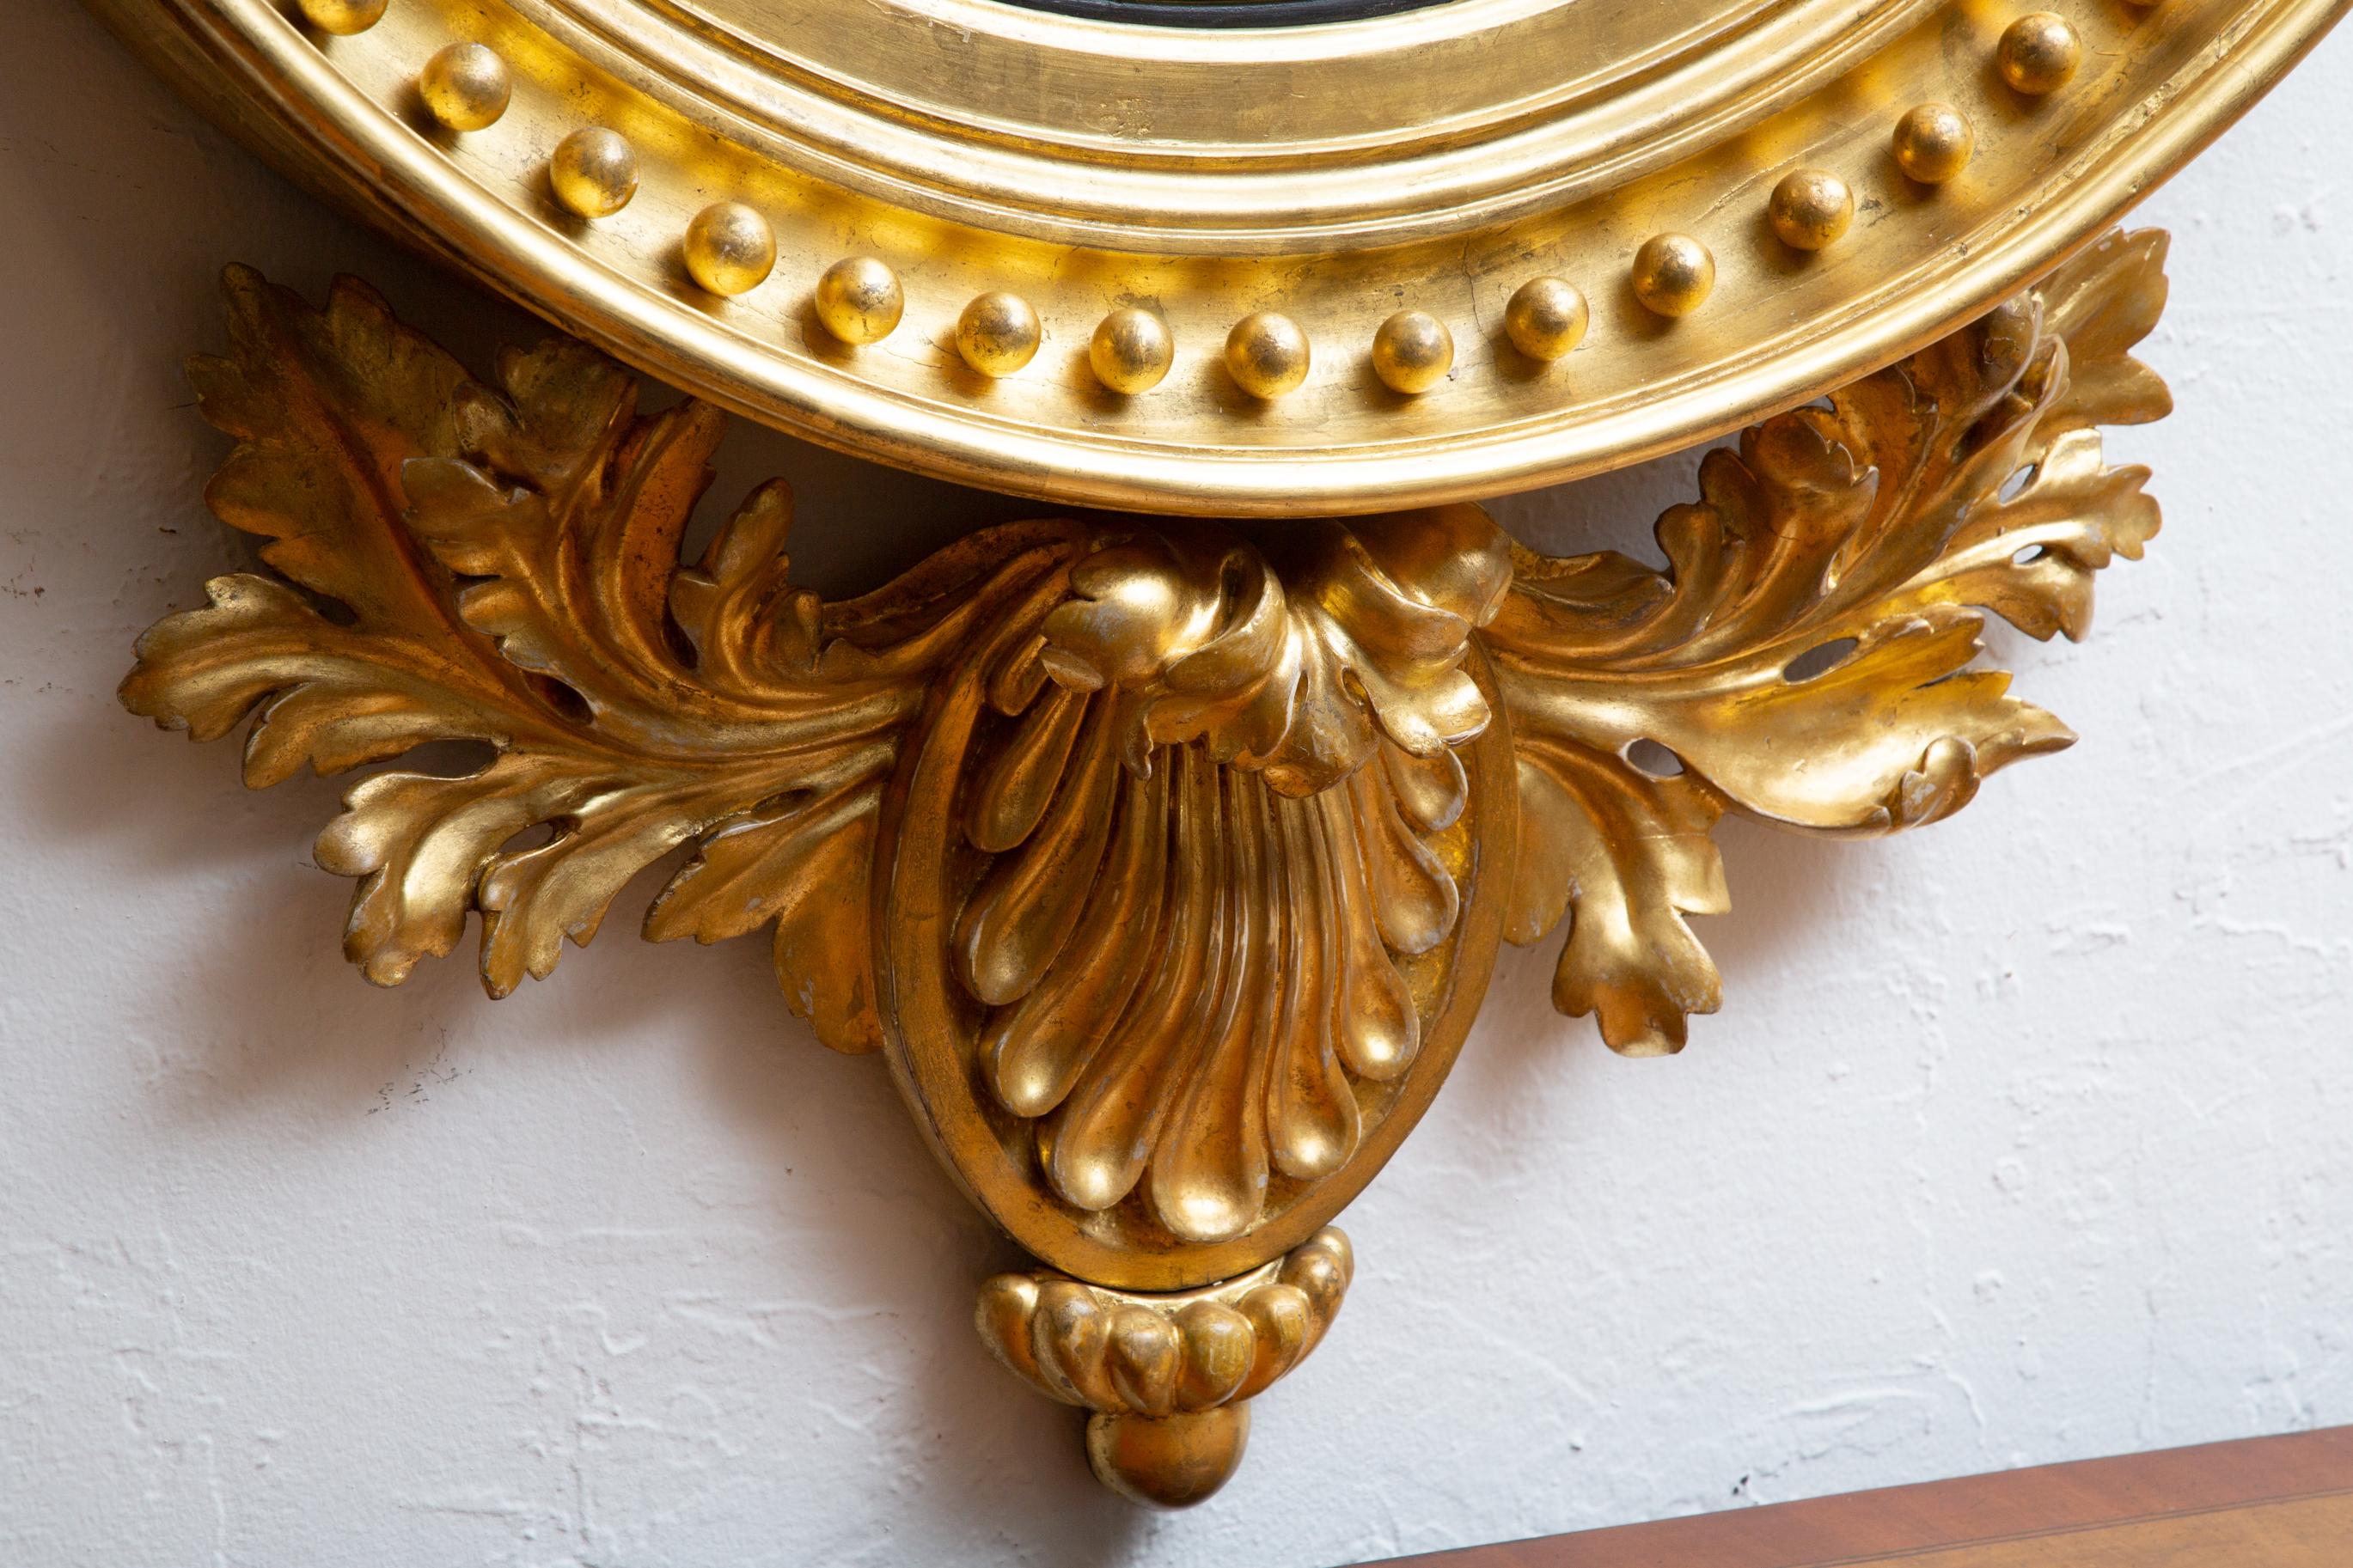 Continentinal Gilt Early 19th Century Wall Mirror For Sale 5